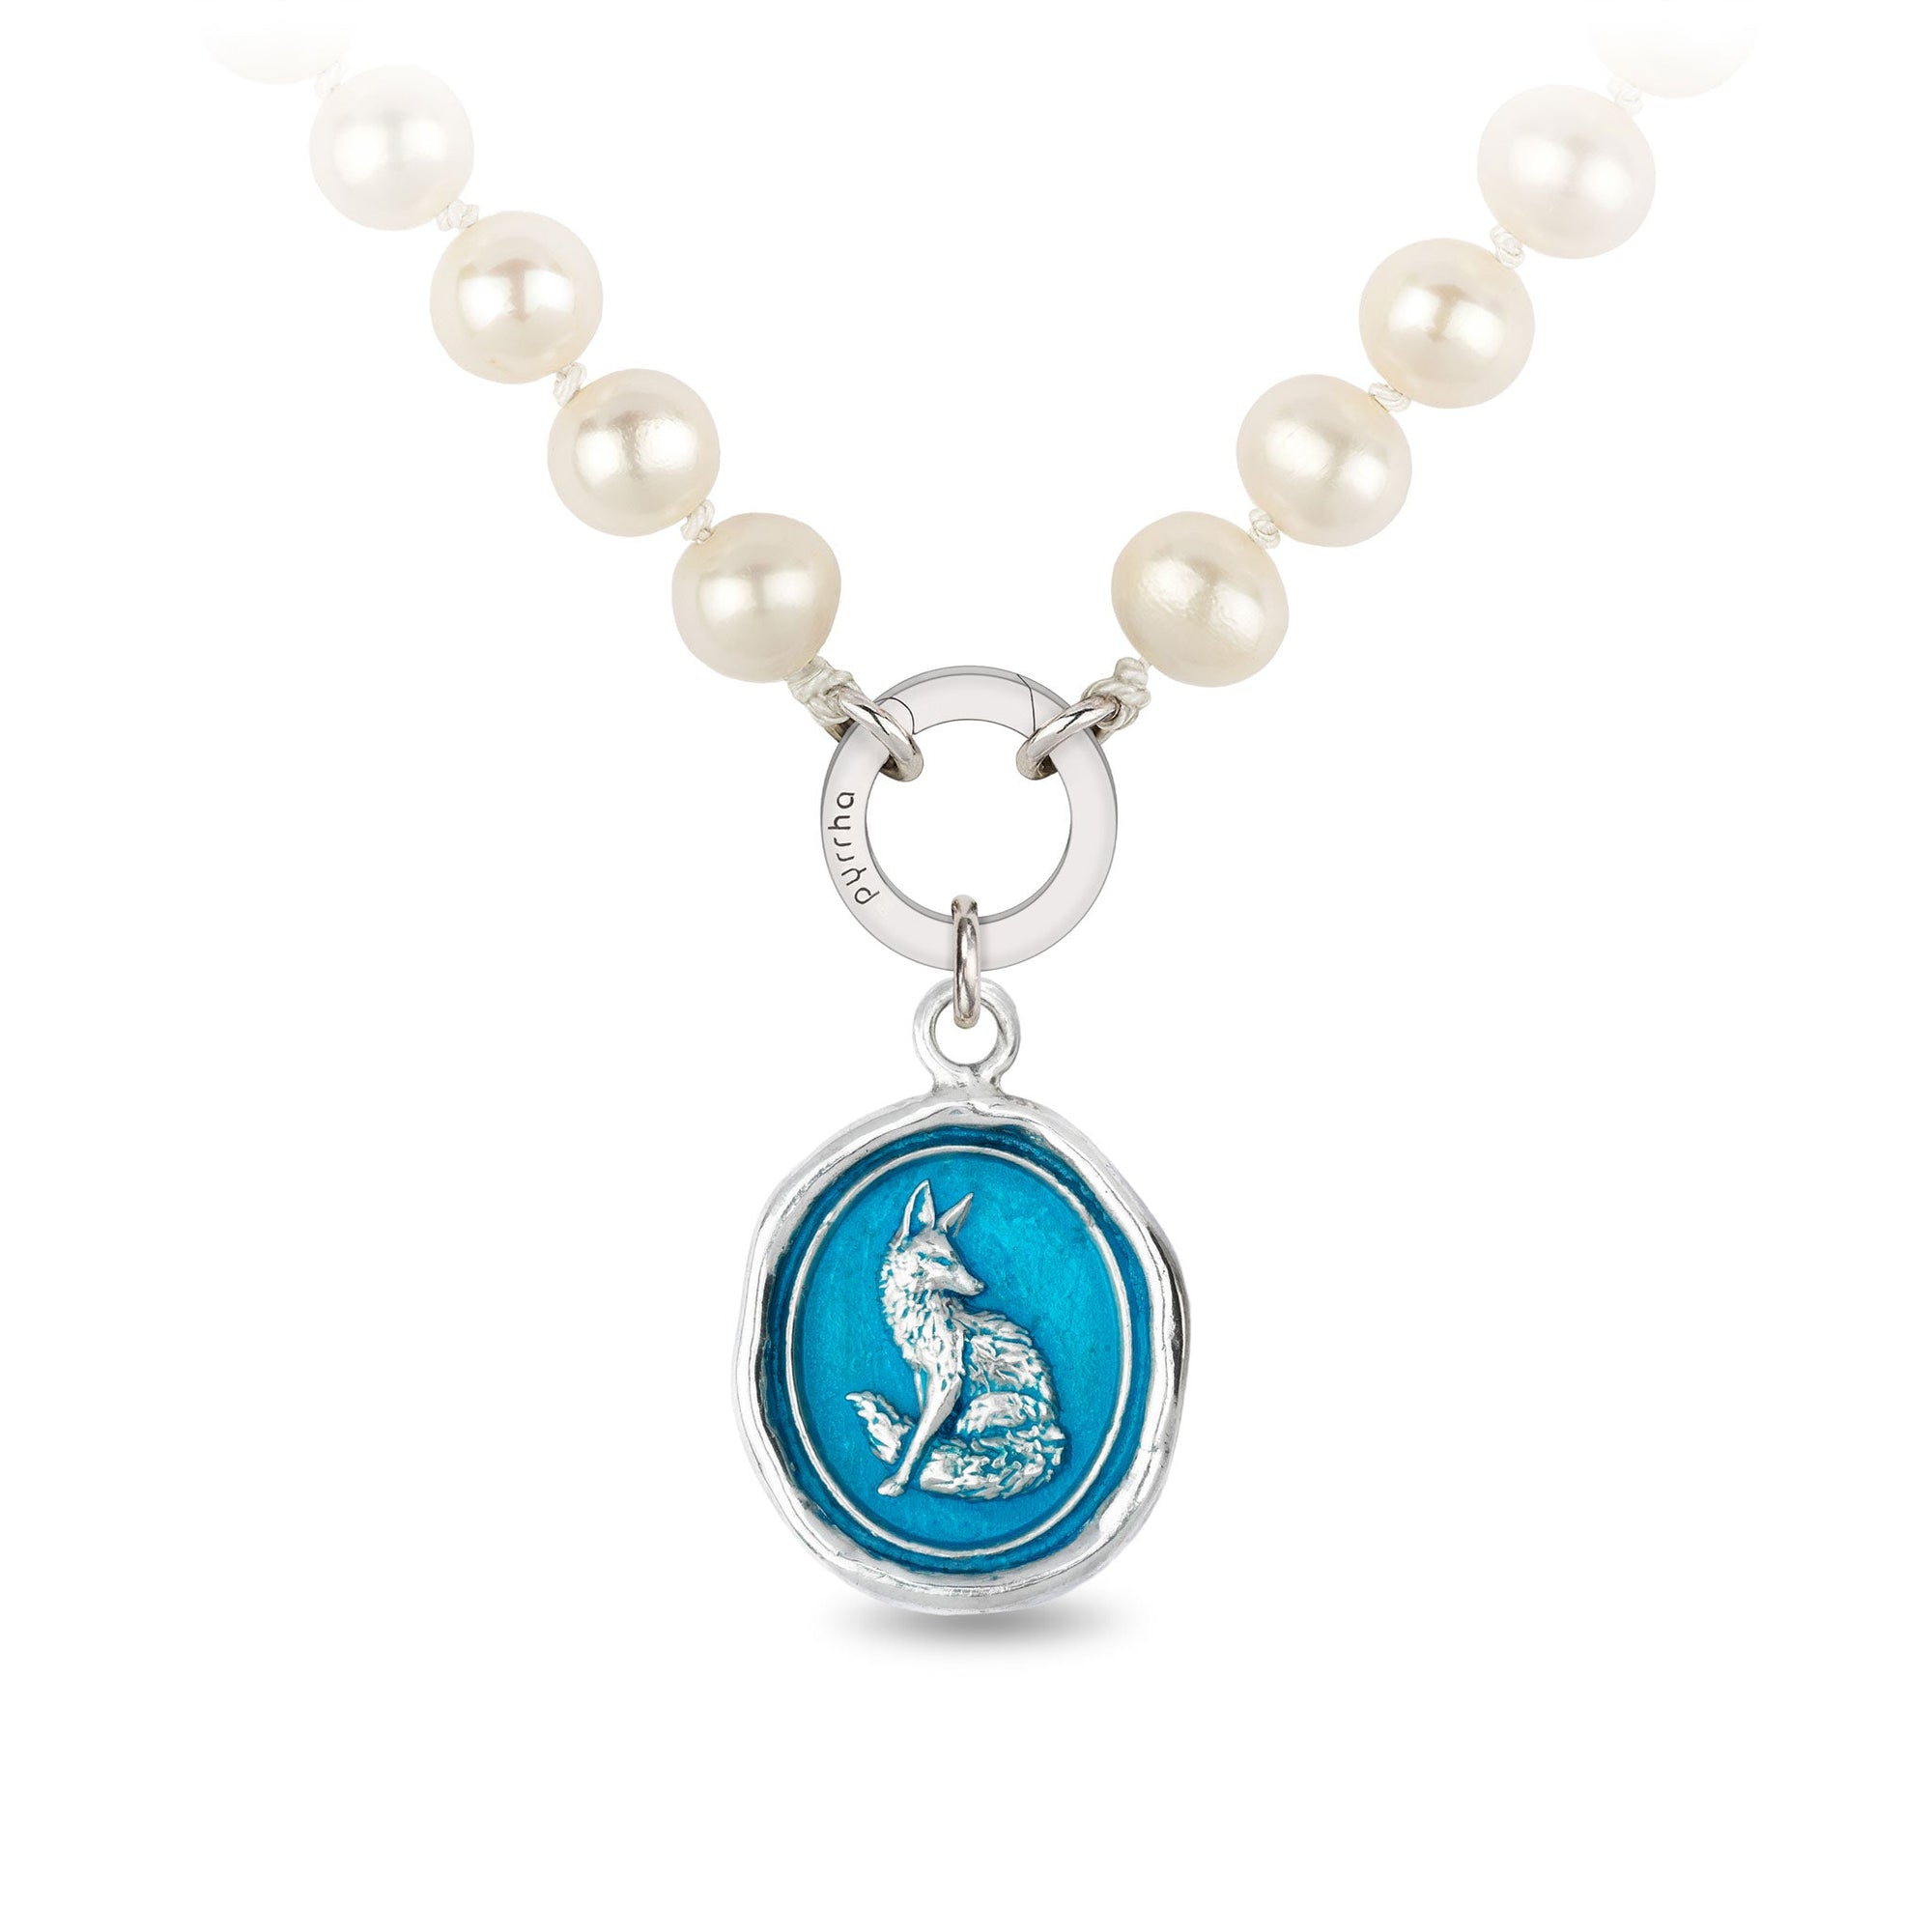 Trust in Yourself Knotted Freshwater Pearl Necklace - Capri Blue